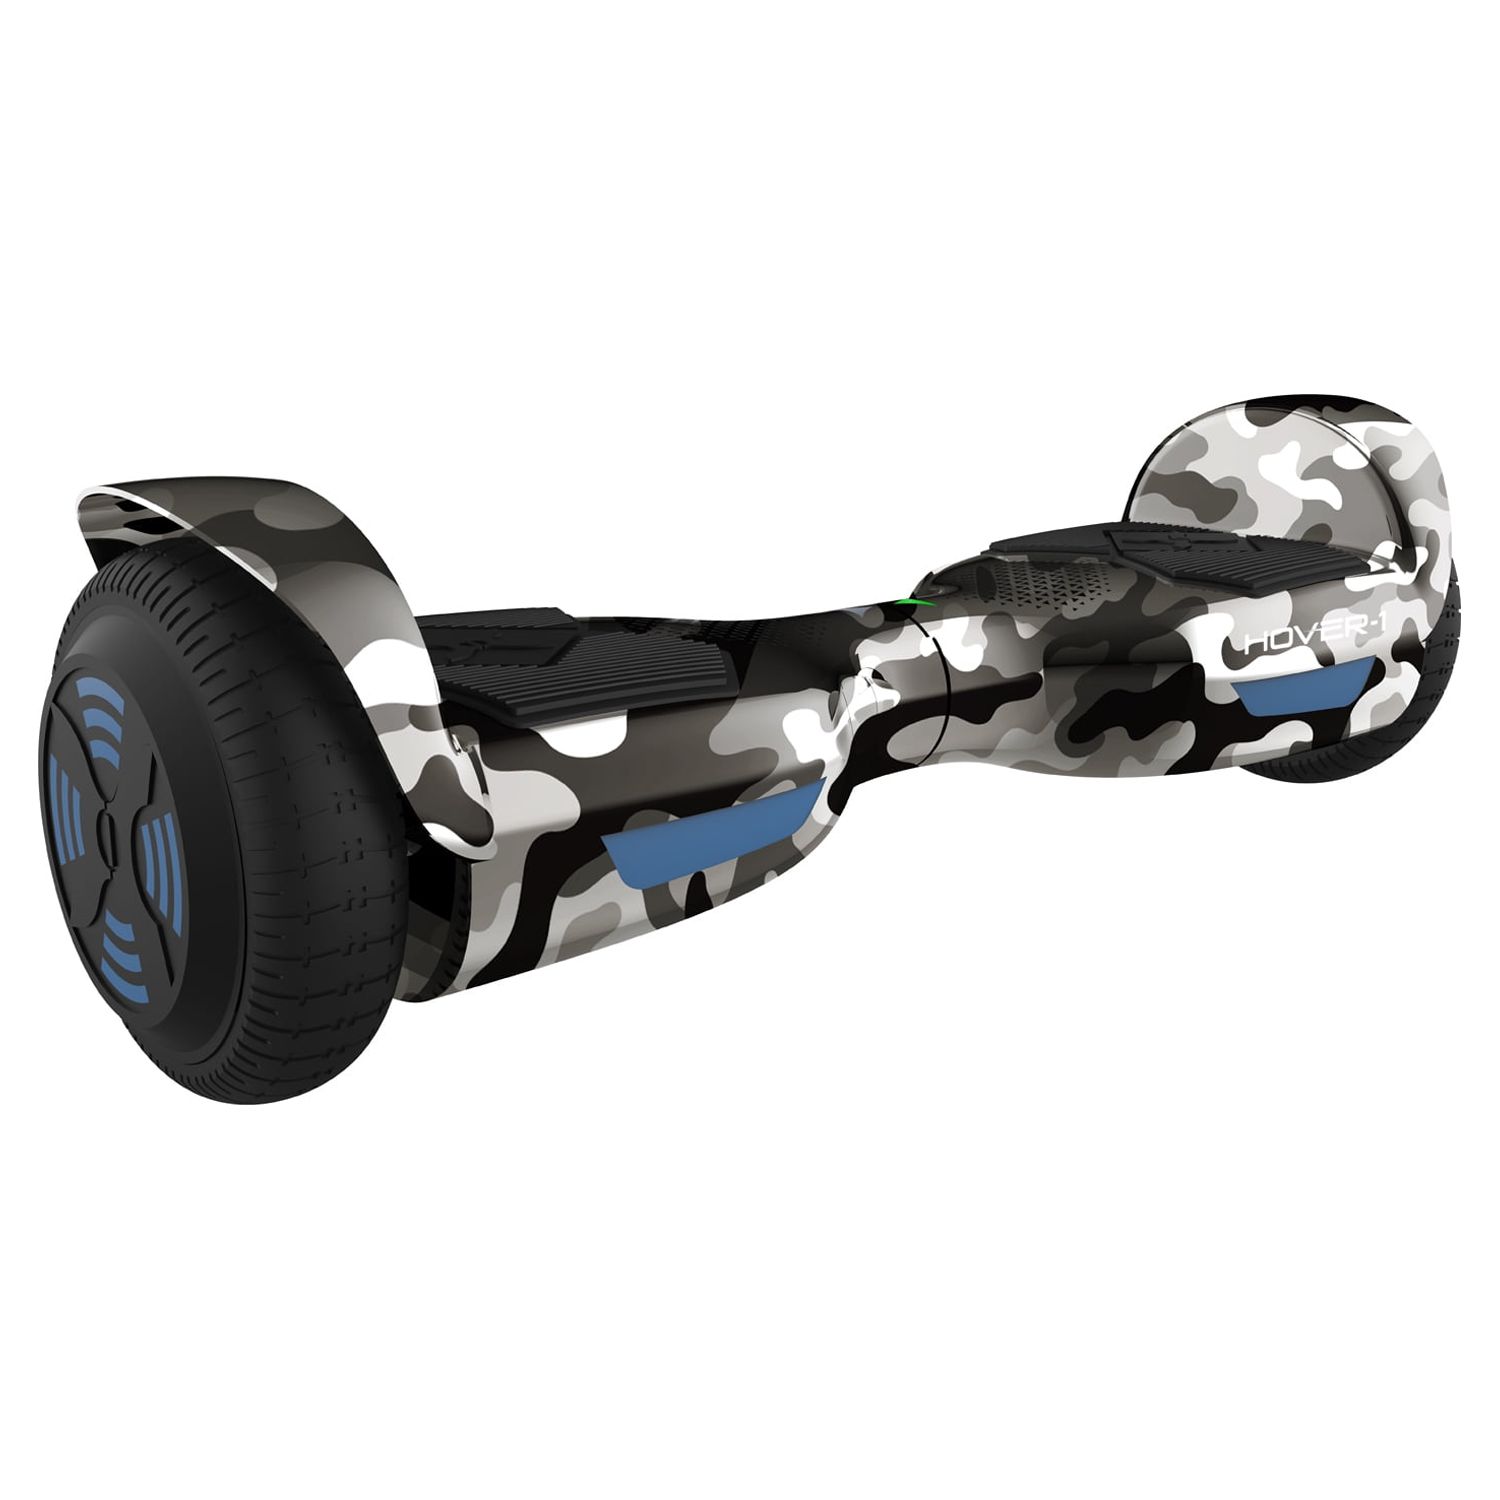 Hover-1 Helix UL Certified Electric Hoverboard with 6.5 In. LED Wheels, LED Sensor Lights, Bluetooth Speaker, Lithium-ion 10 Cell battery, Ages 8+, 160 Lbs Max Weight, Camouflage - image 4 of 10